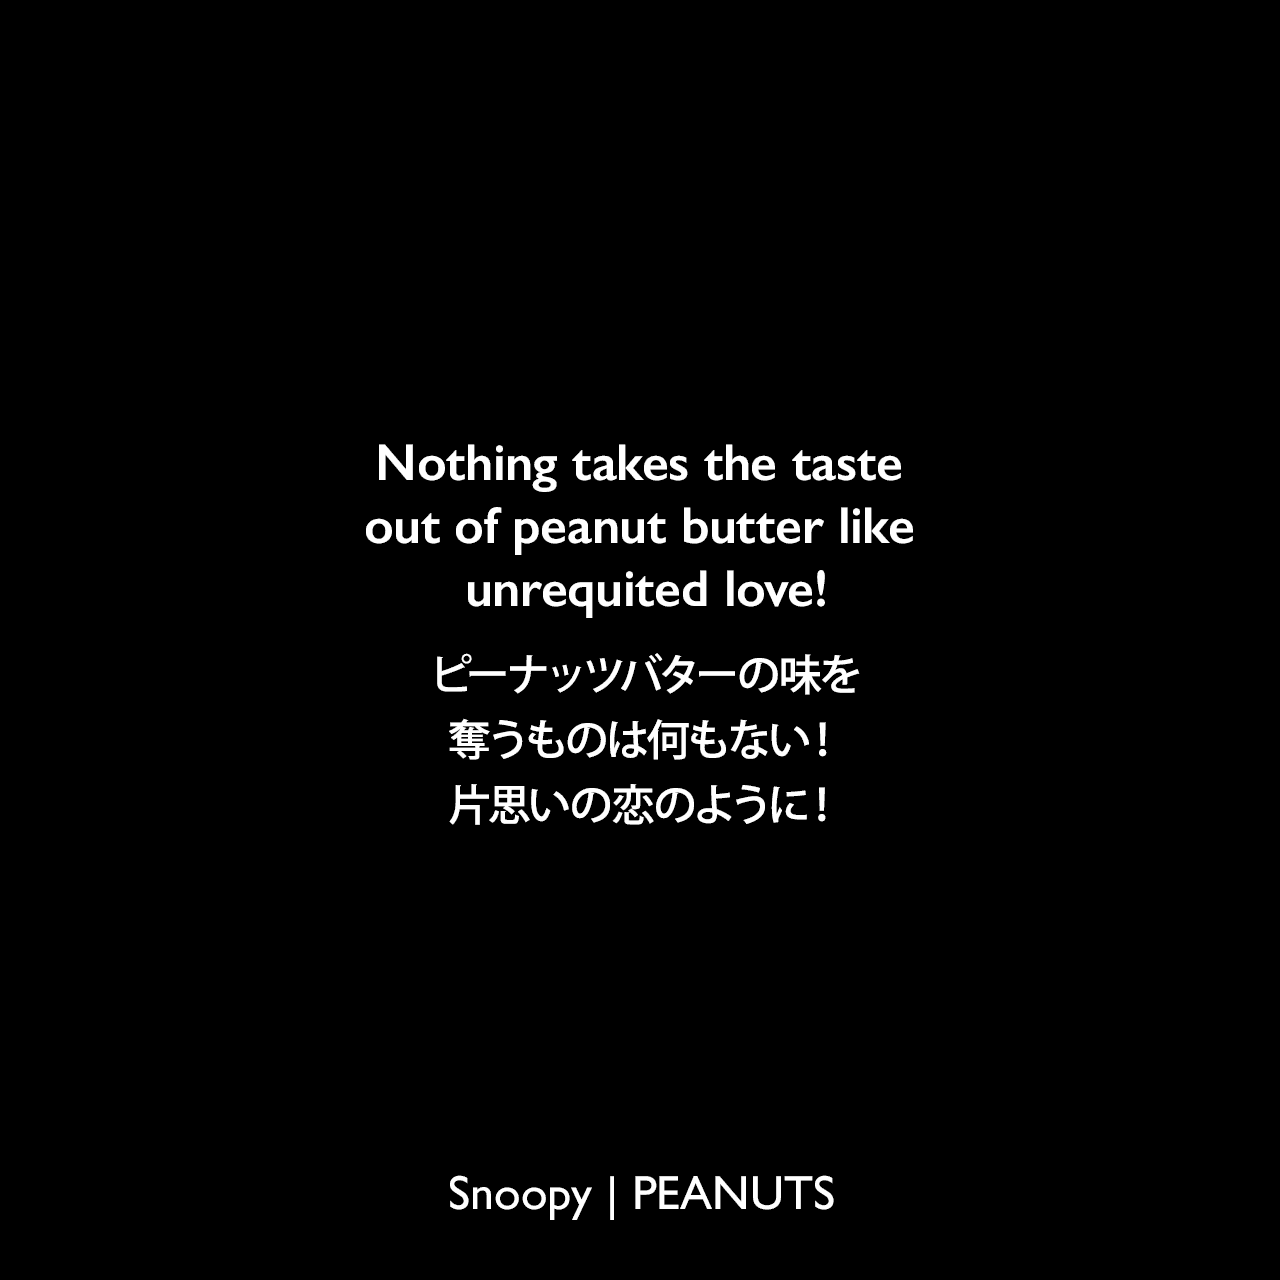 Nothing takes the taste out of peanut butter like unrequited love!ピーナッツバターの味を奪うものは何もない！片思いの恋のように！- チャーリー・ブラウン (1964年12月15日のコミック)Charles Monroe Schulz